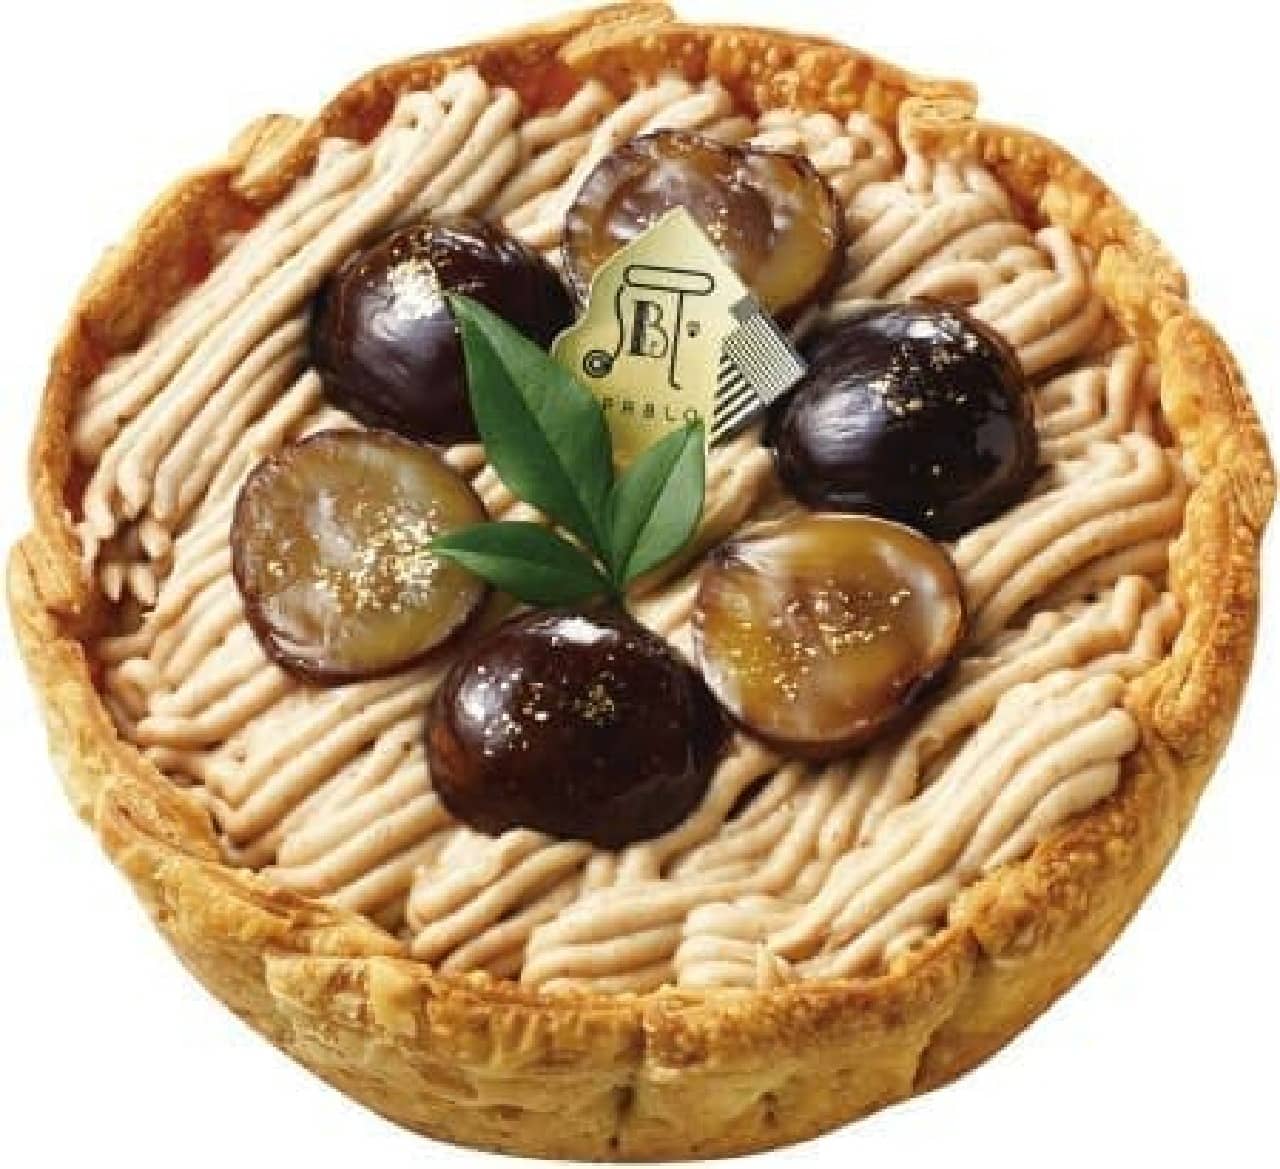 Autumn cheese tart where you can taste chestnuts luxuriously